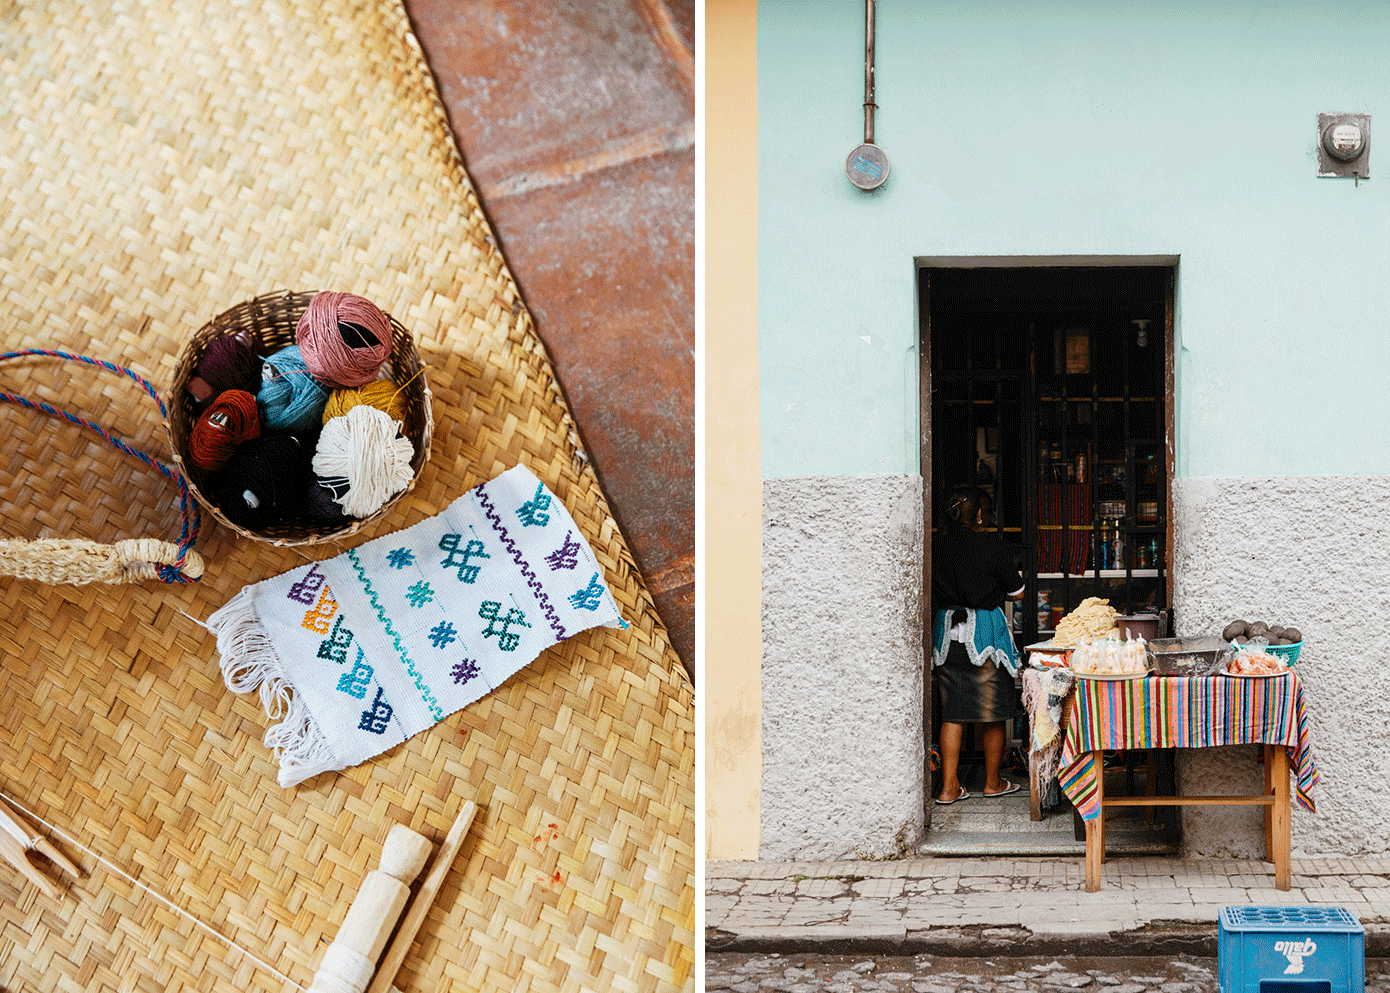 On the left, a basket of yarn on top of a bamboo rug. On the right, a table sitting in front of an open doorway.